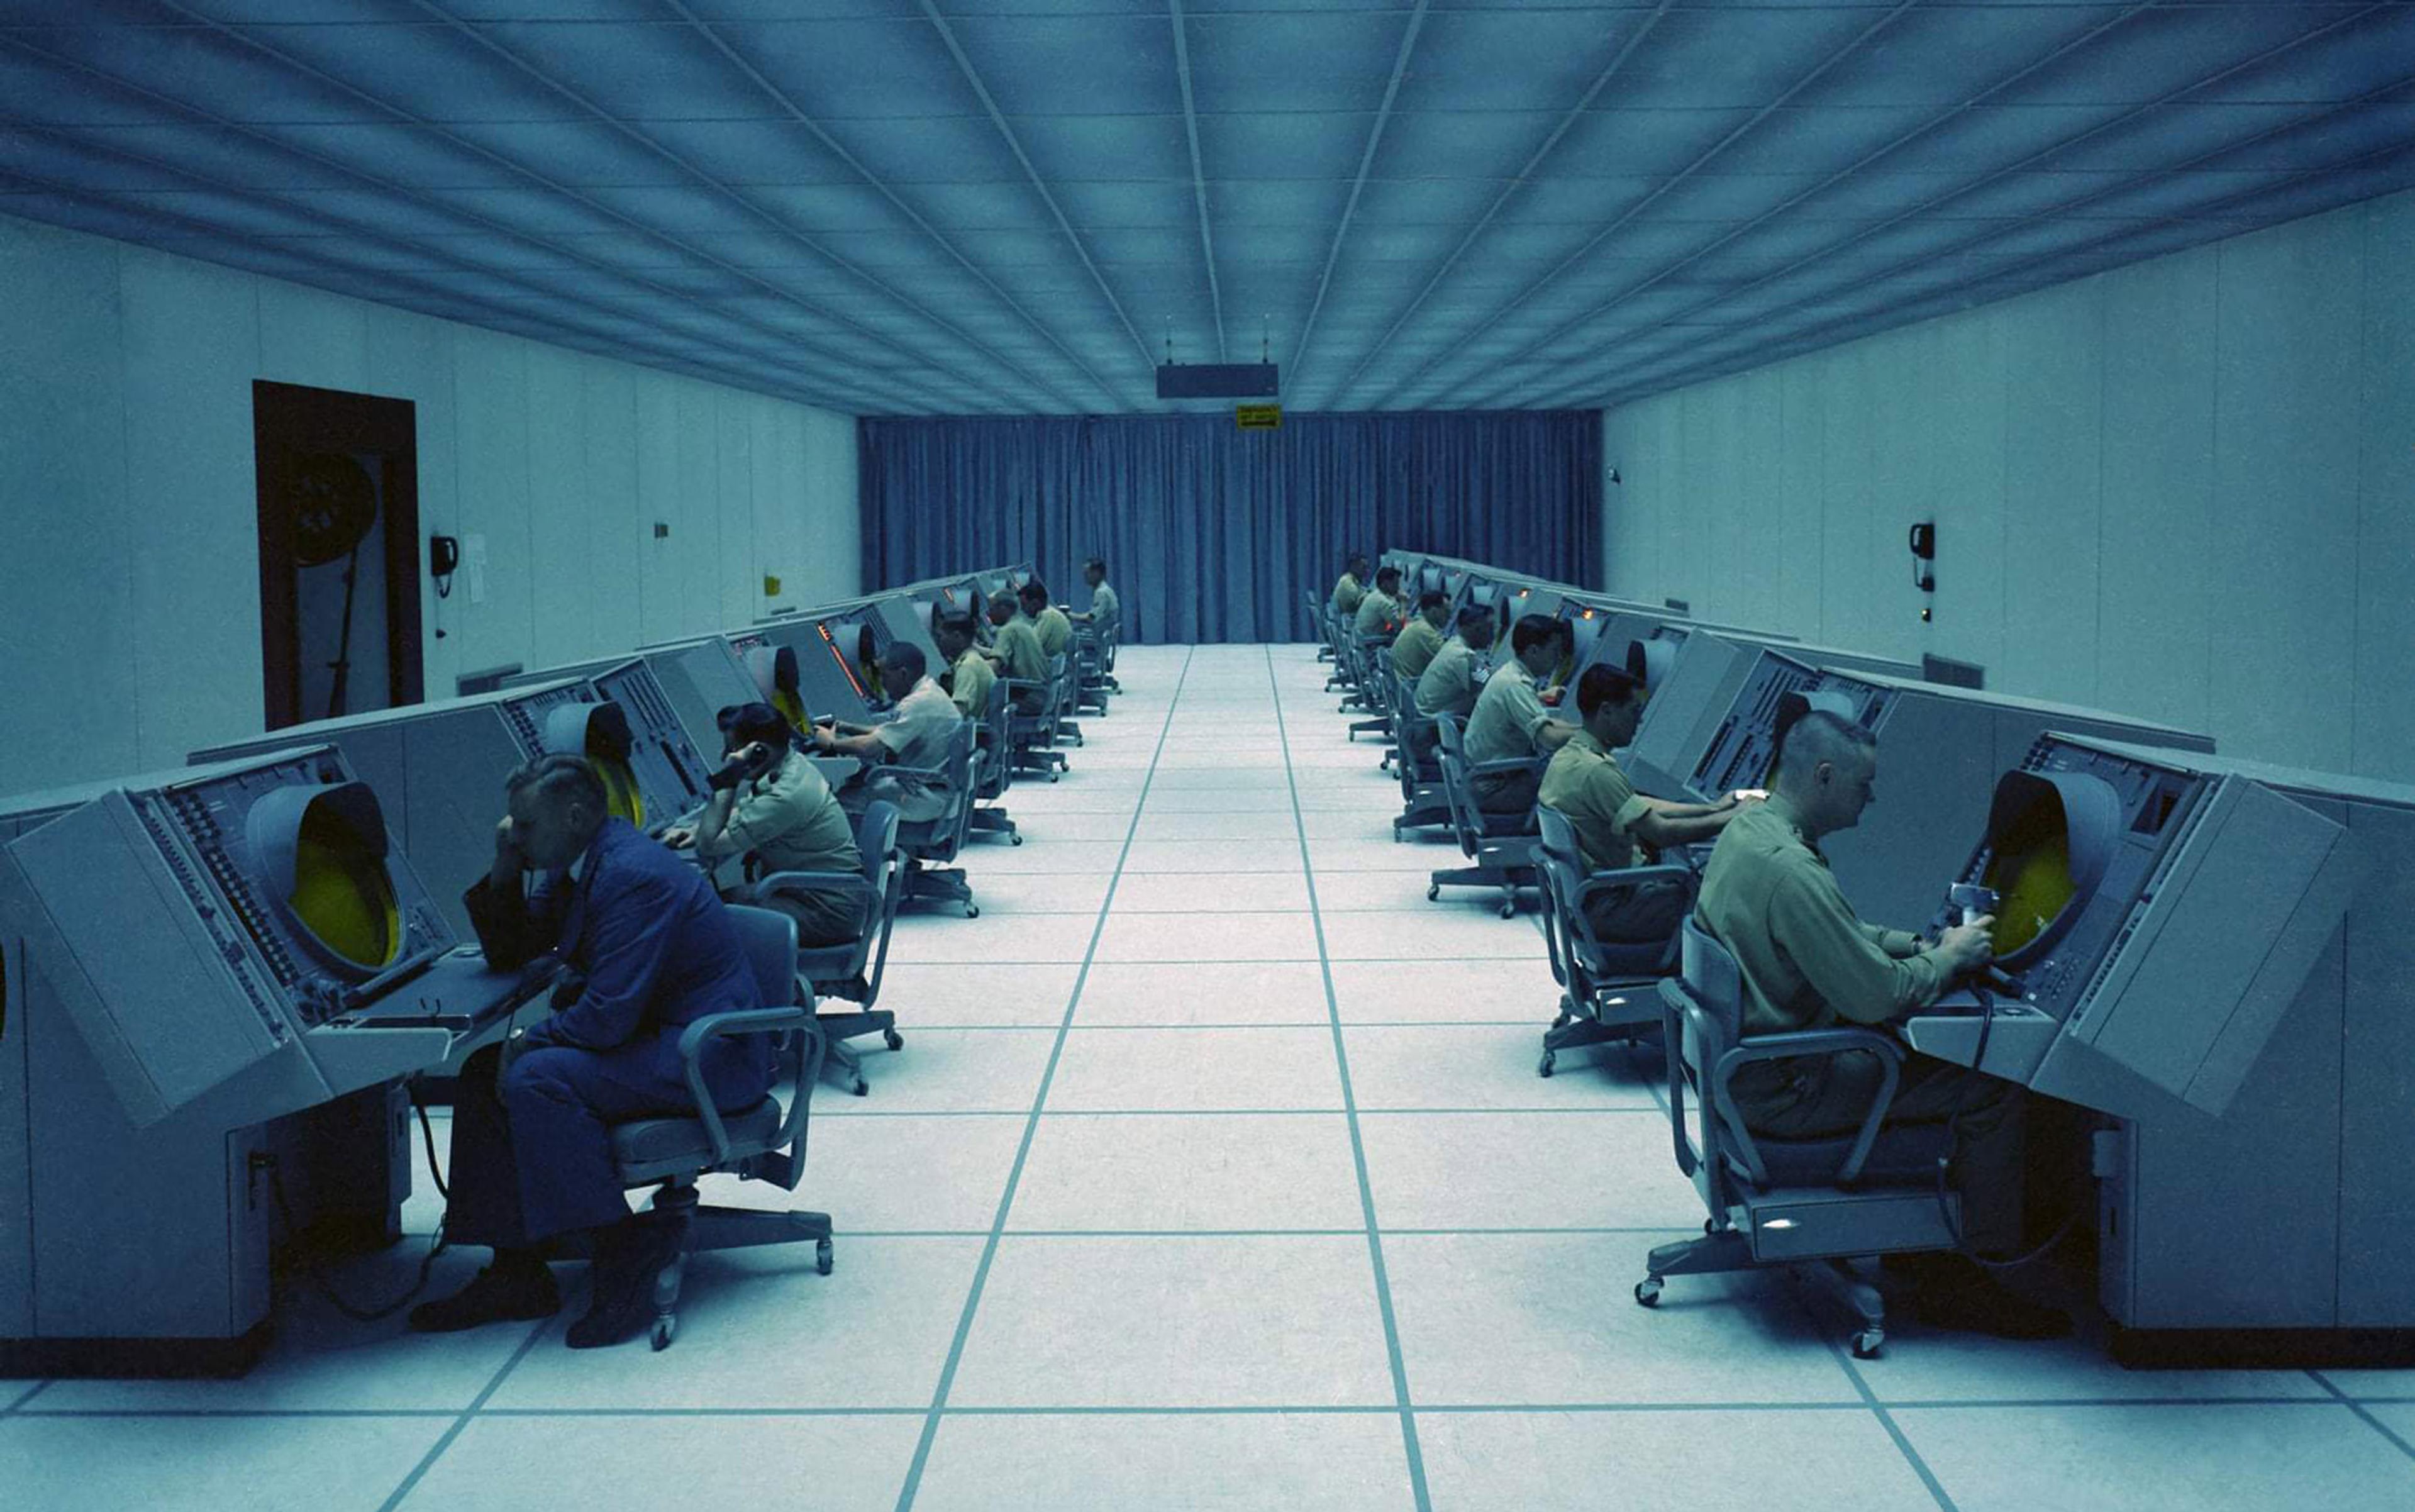 A large control room with people sitting at consoles in two rows, facing away from each other, under blue lighting.